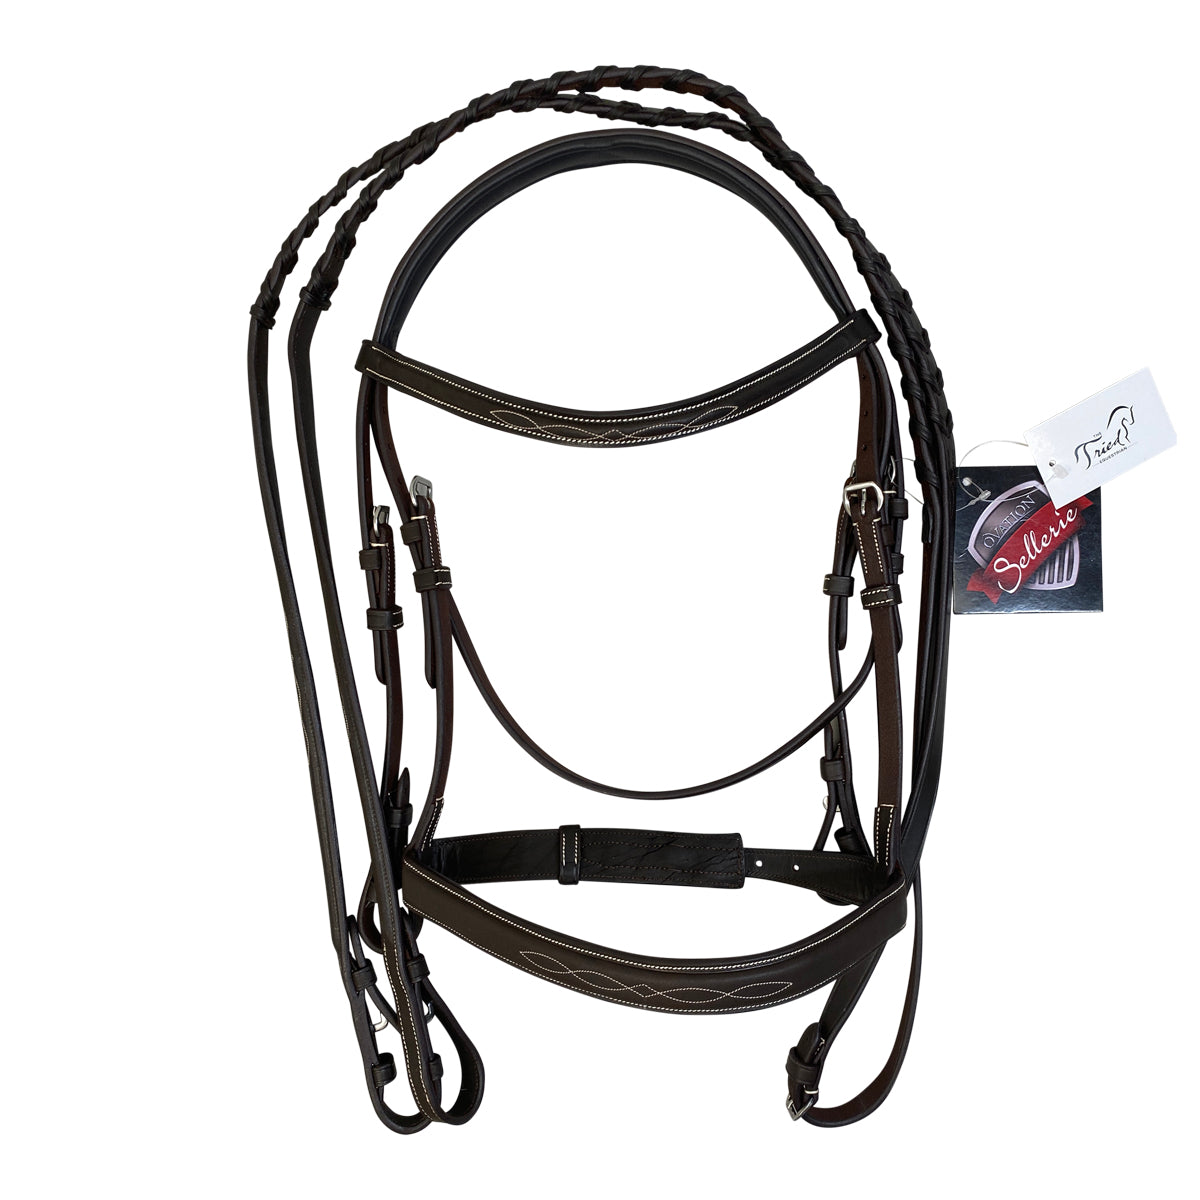 Ovation Classic &#39;Fancy Stitched Wide Nose Comfort Crown&#39; Bridle in Brown - Cob